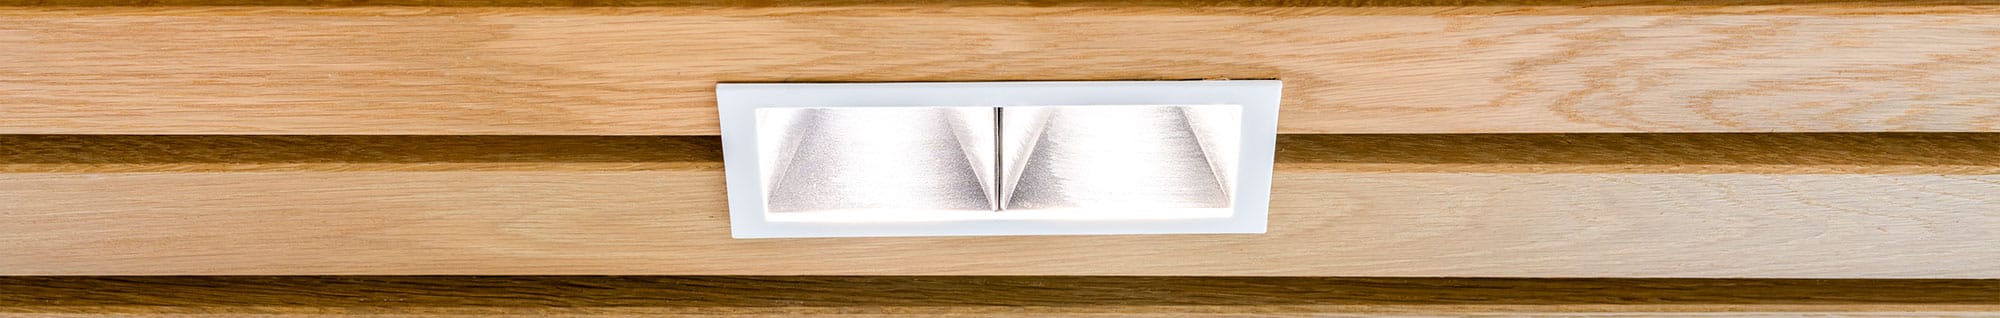 Quantum Recessed Downlight Featuring in the Slats of a Office